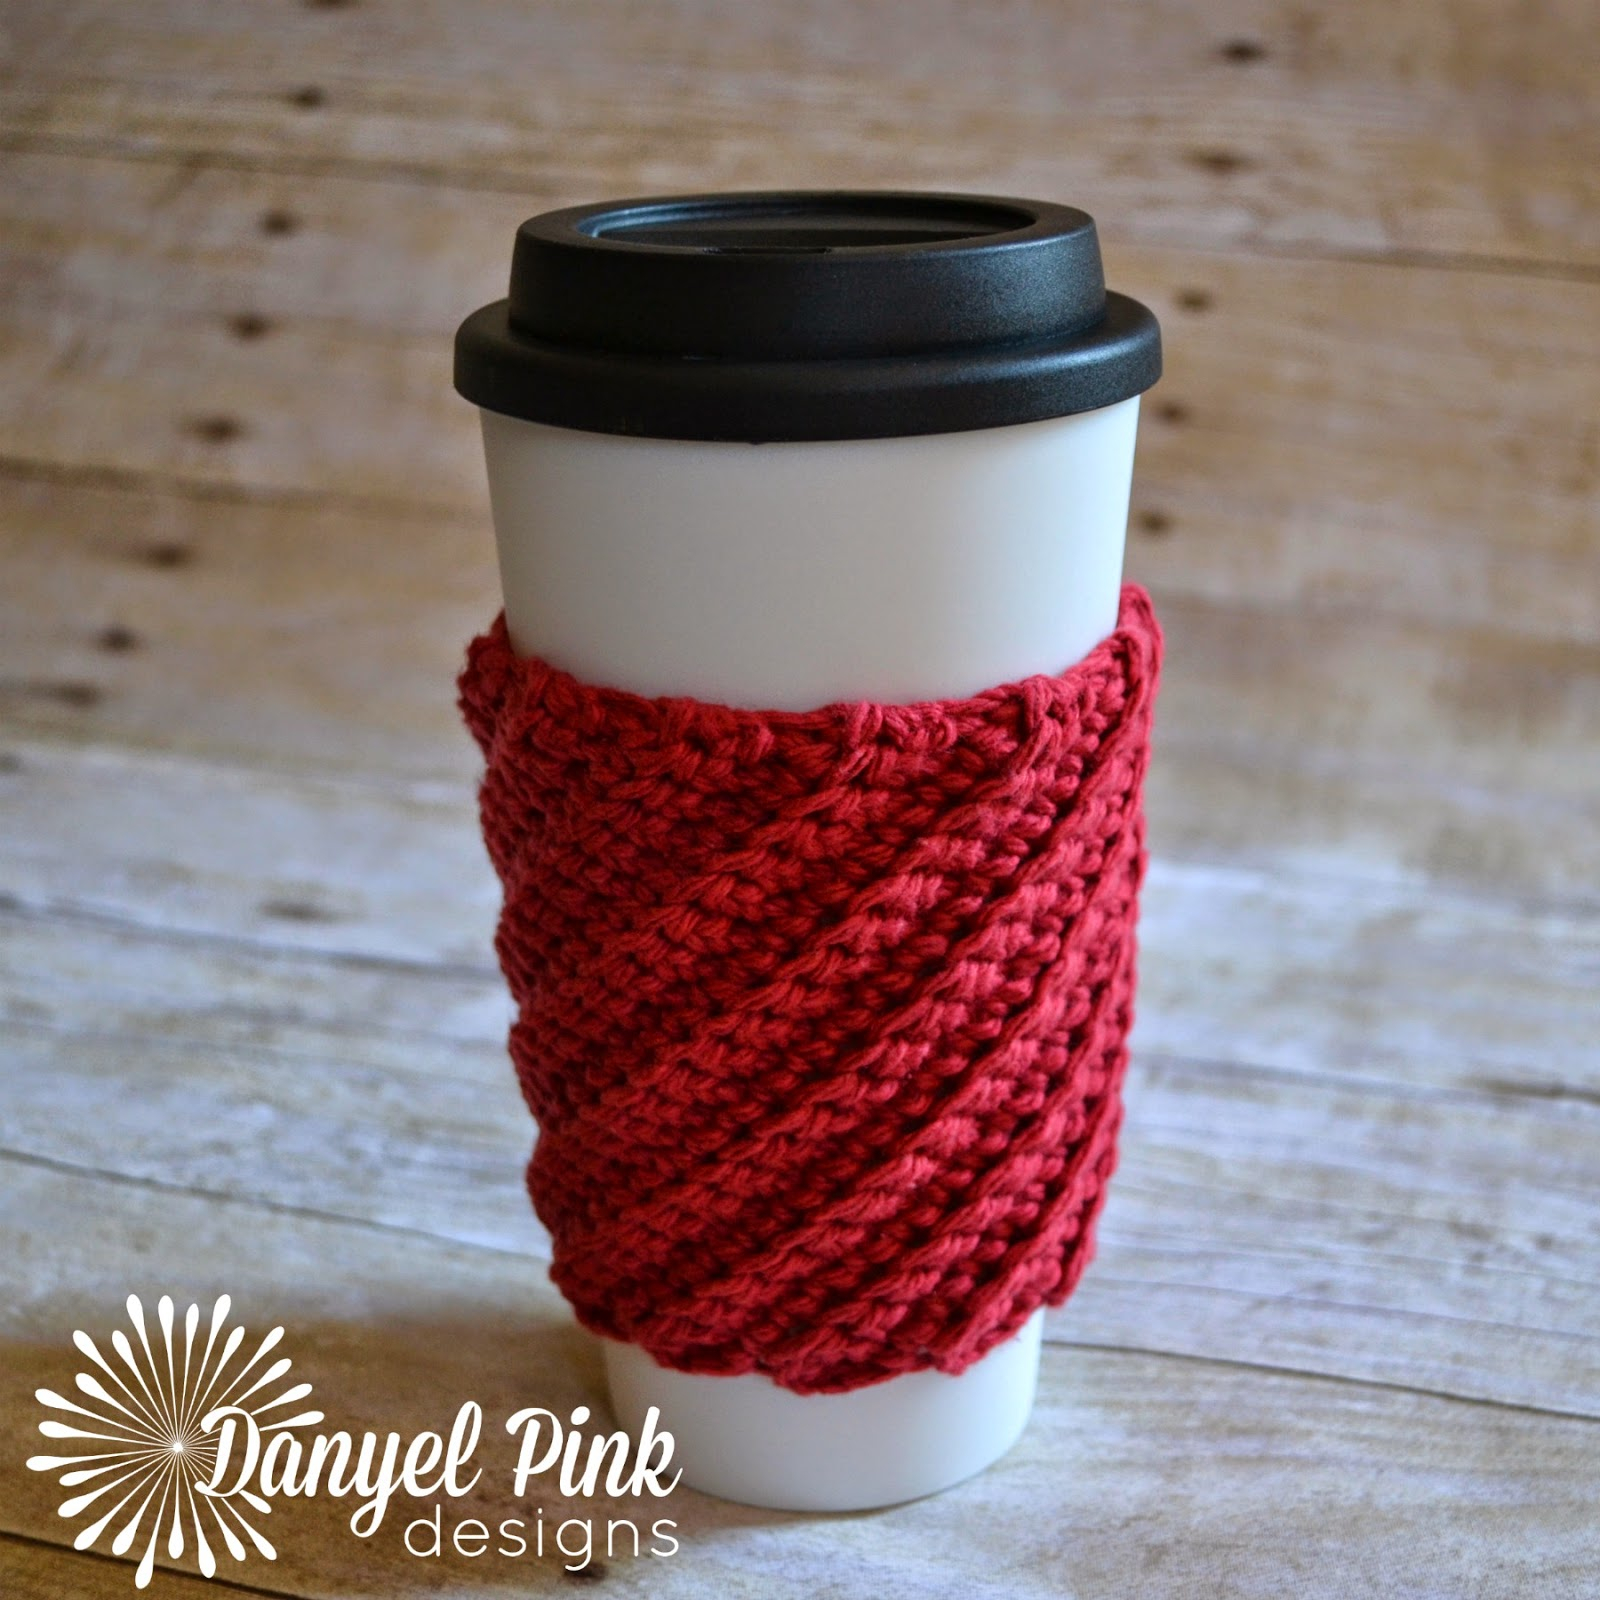 Cup Cosy Crochet Pattern Danyel Pink Designs Crochet Pattern Crooked Coffee Cozy